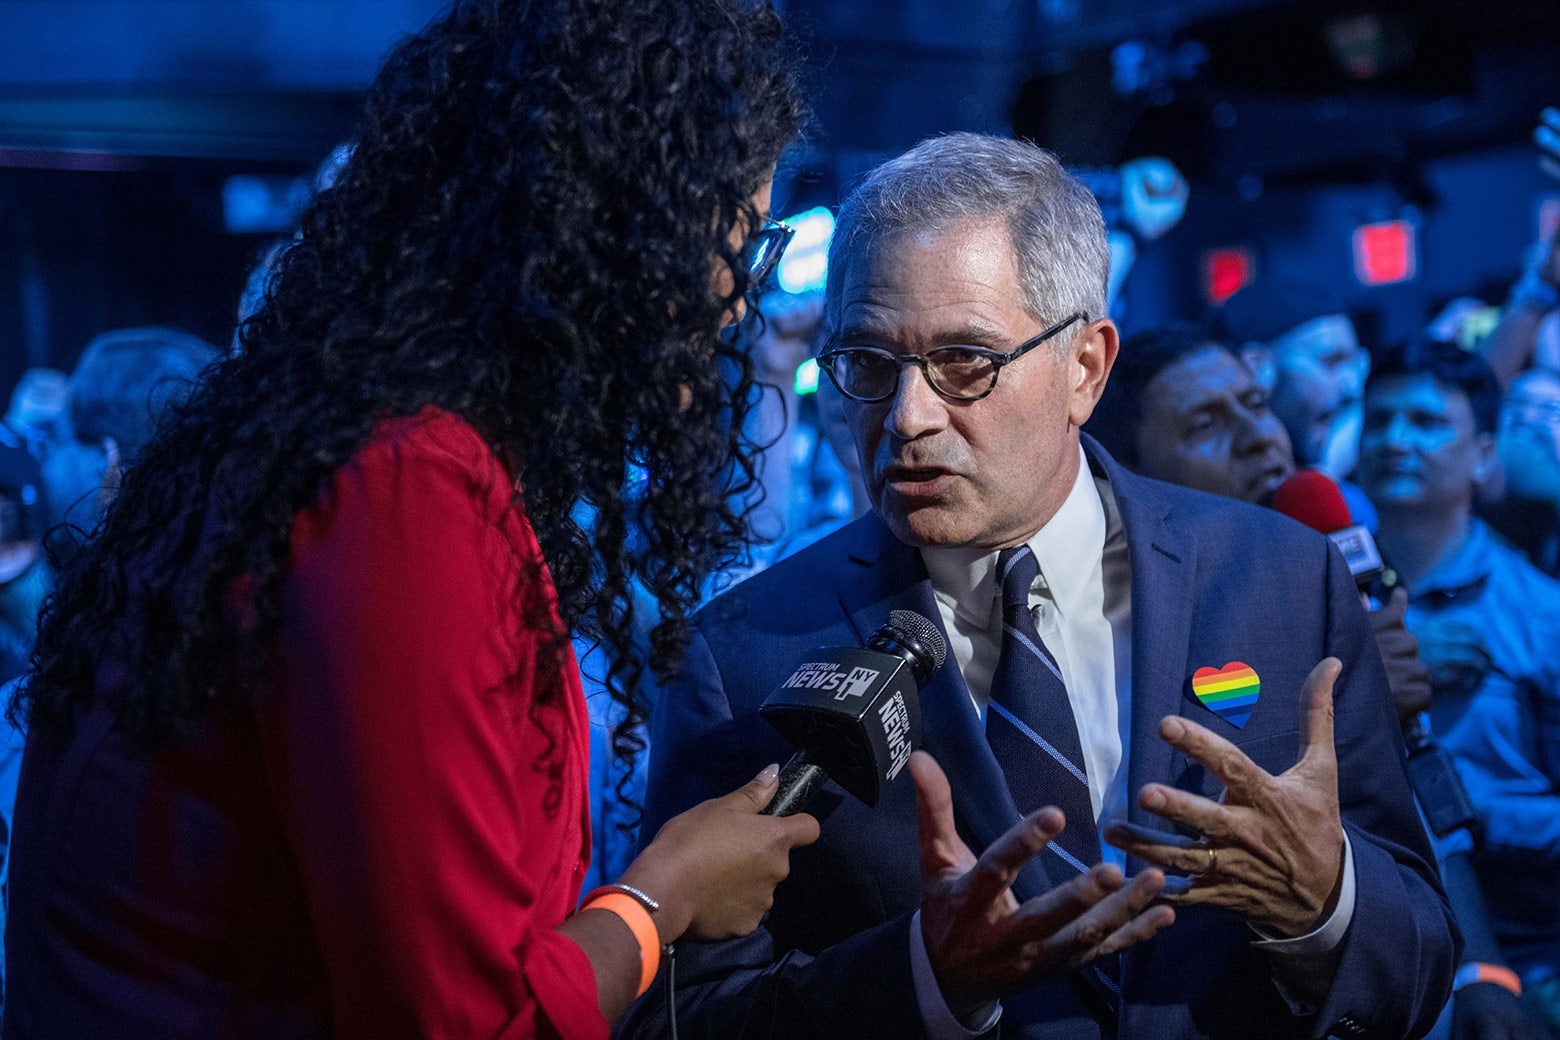 Krasner talks to a reporter amid a crowd of people.